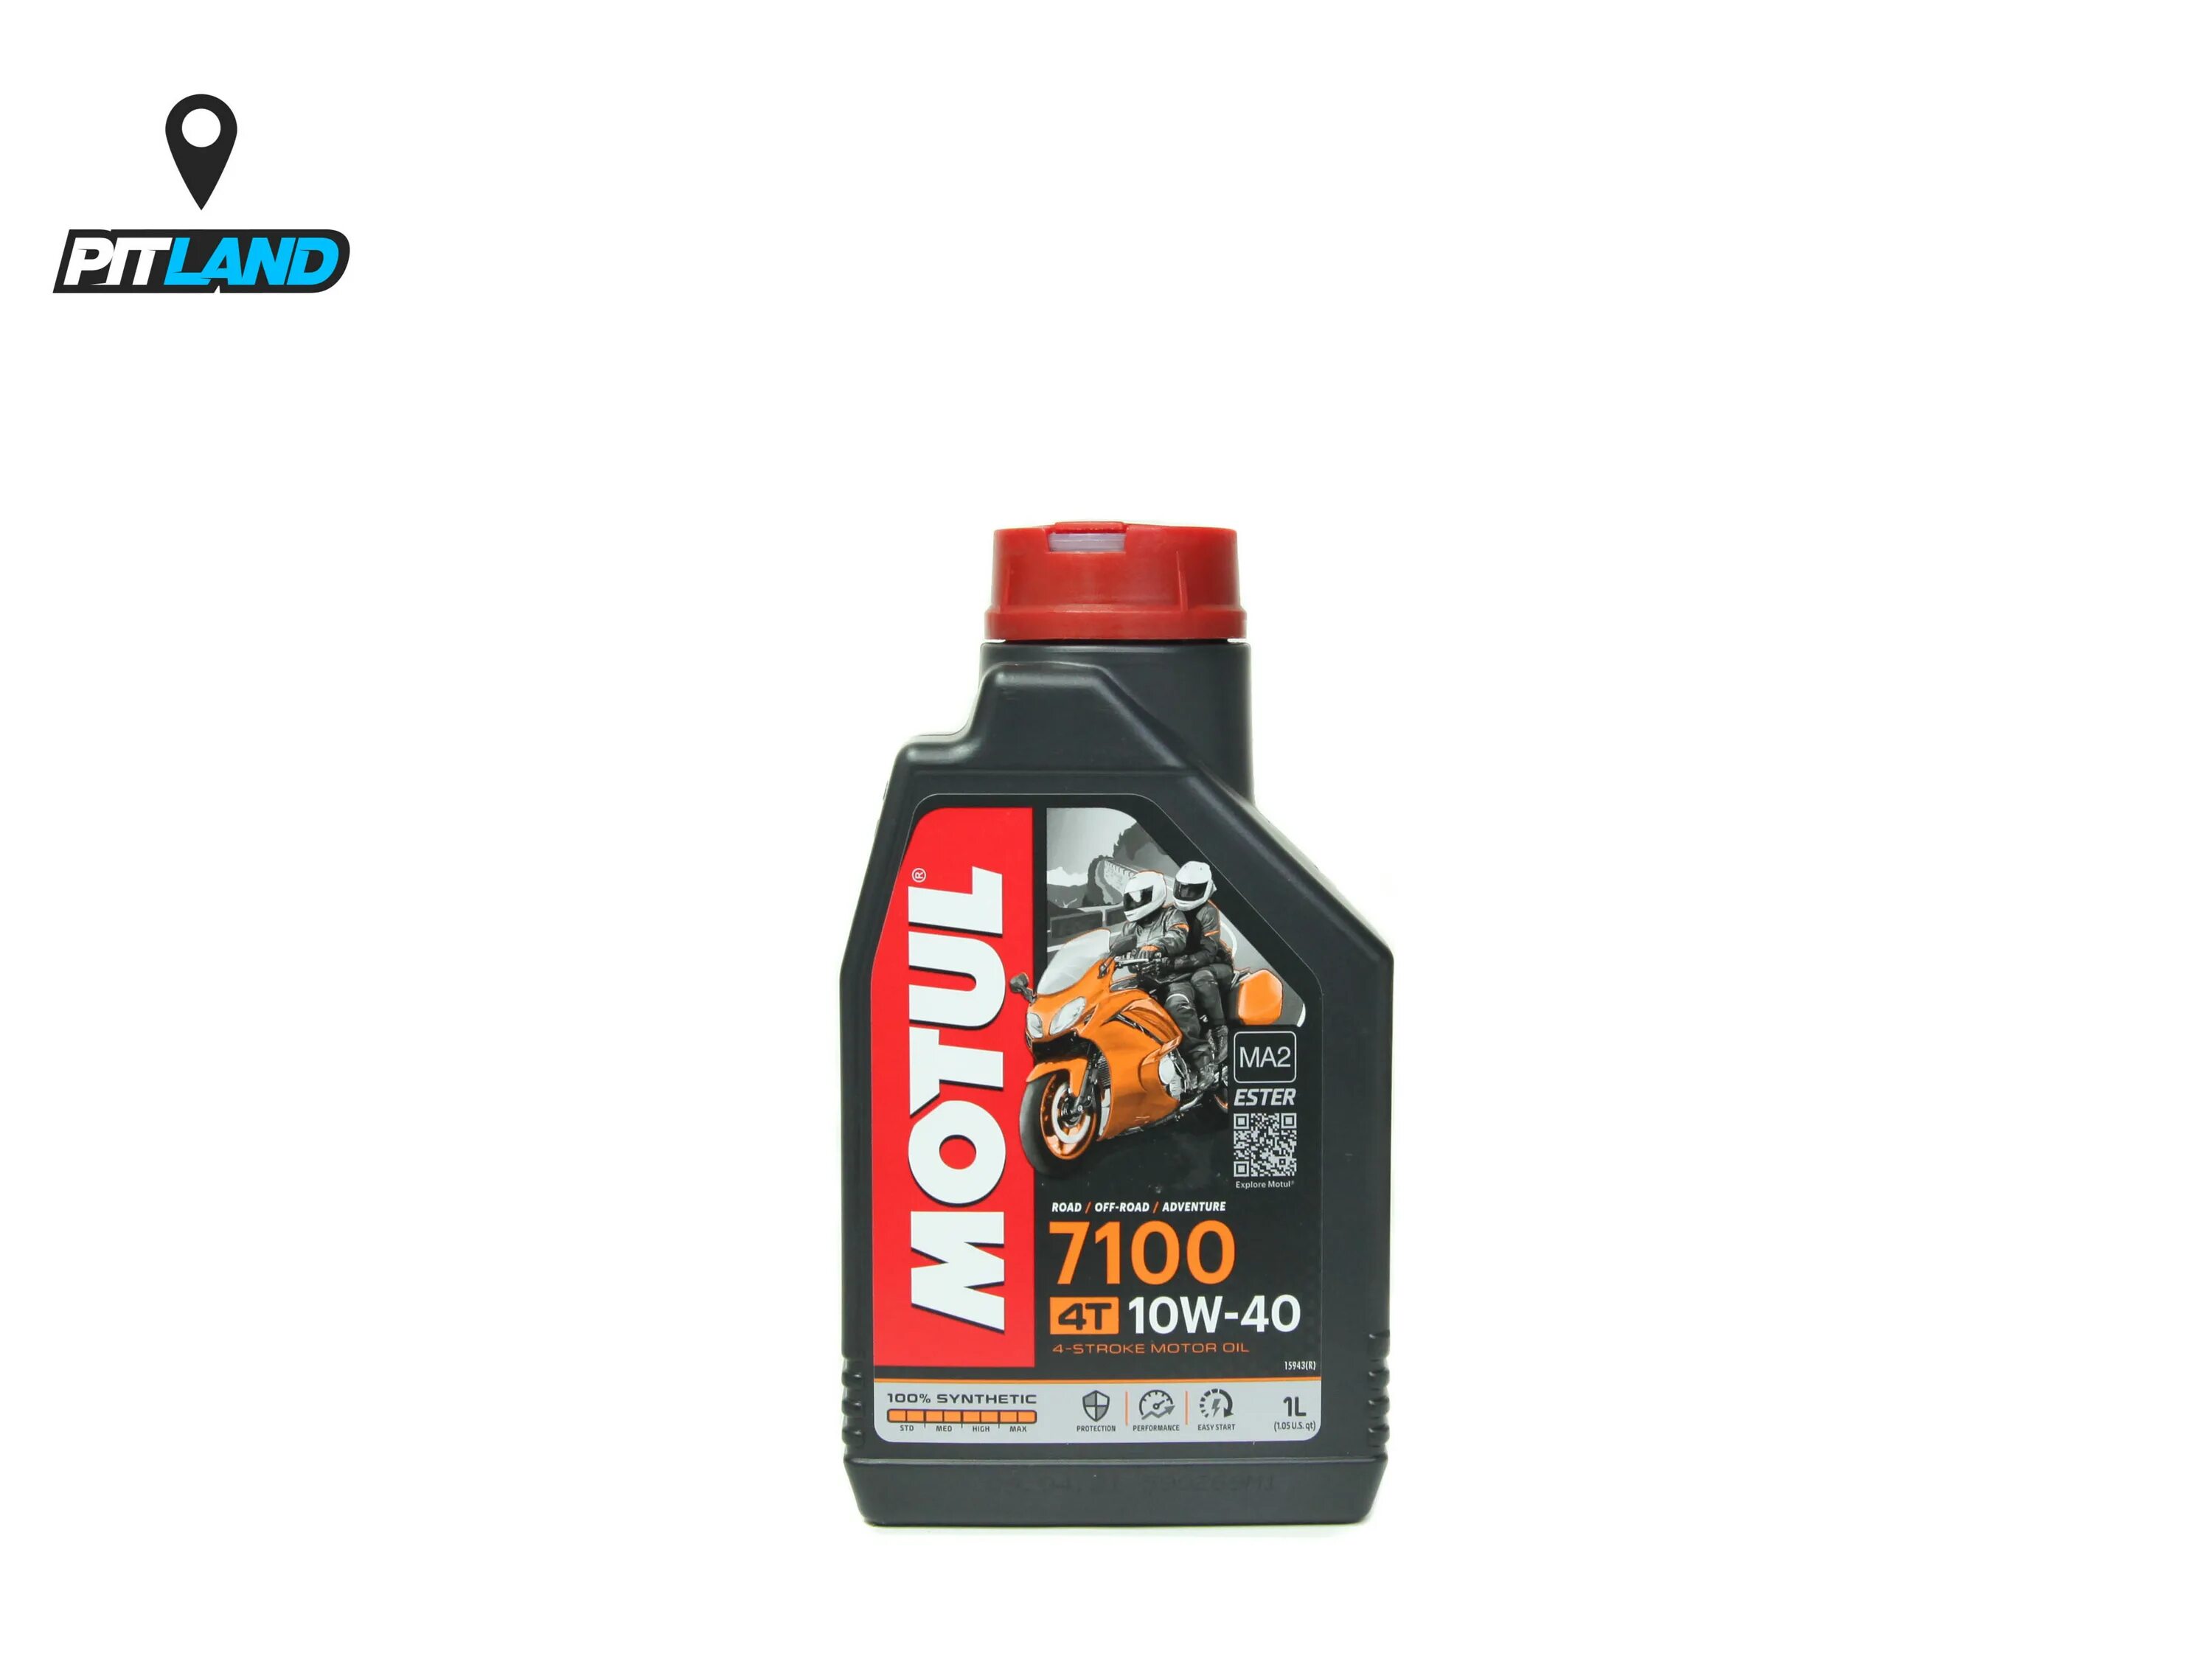 Масло 7100 4t 10w 40. Моторное масло Motul 7100 4t 10w40 1 л. Мотюль 10w 40 7100 4т. Motul 7100 5w30 4t. Motul 7100 4t 10w60 син (1л).